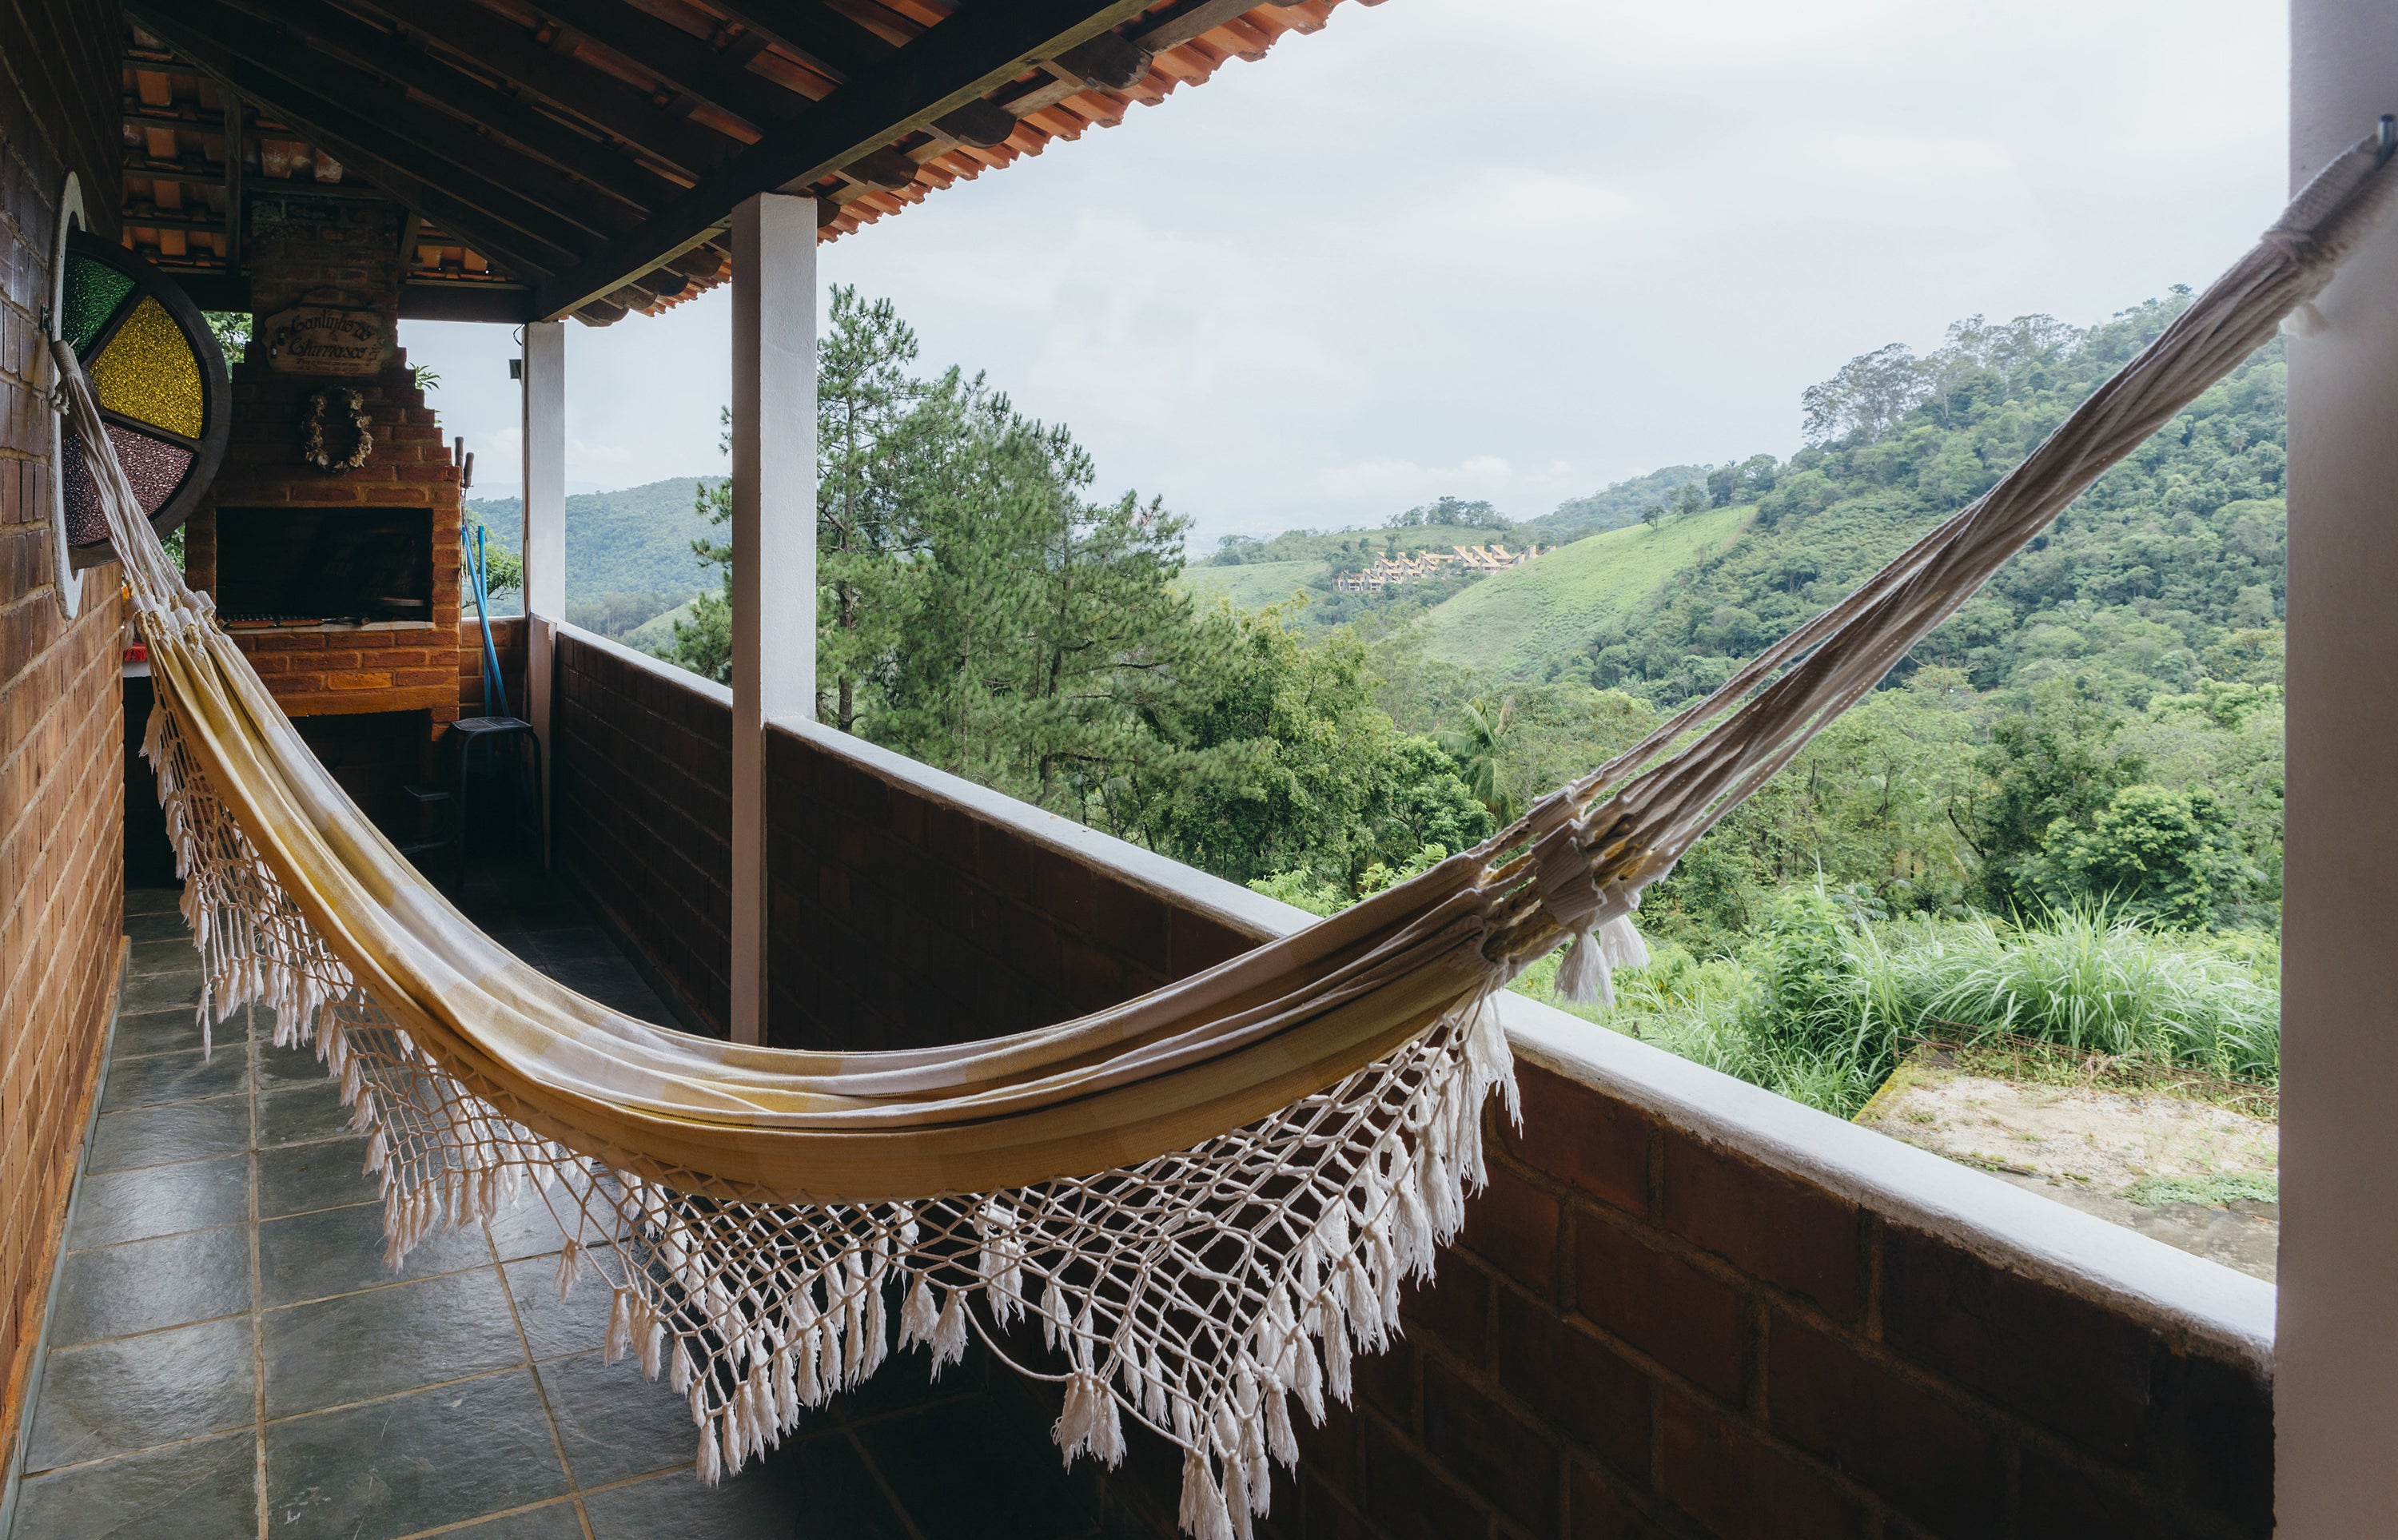 hammock hung on a patio overlooking a green scenery